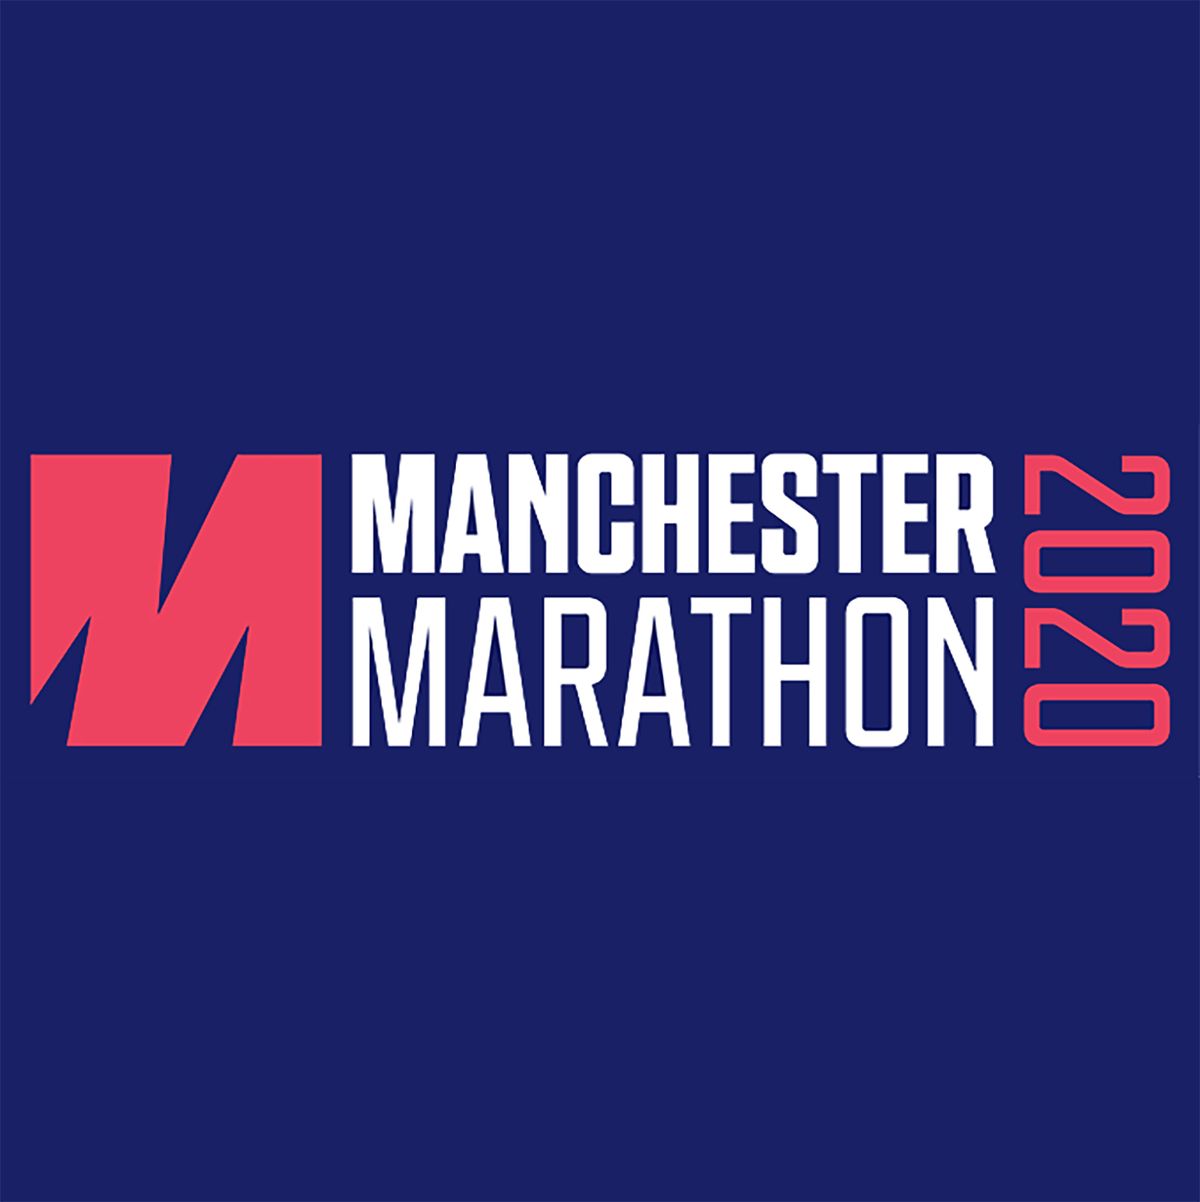 Manchester Marathon 2021 has been moved to October